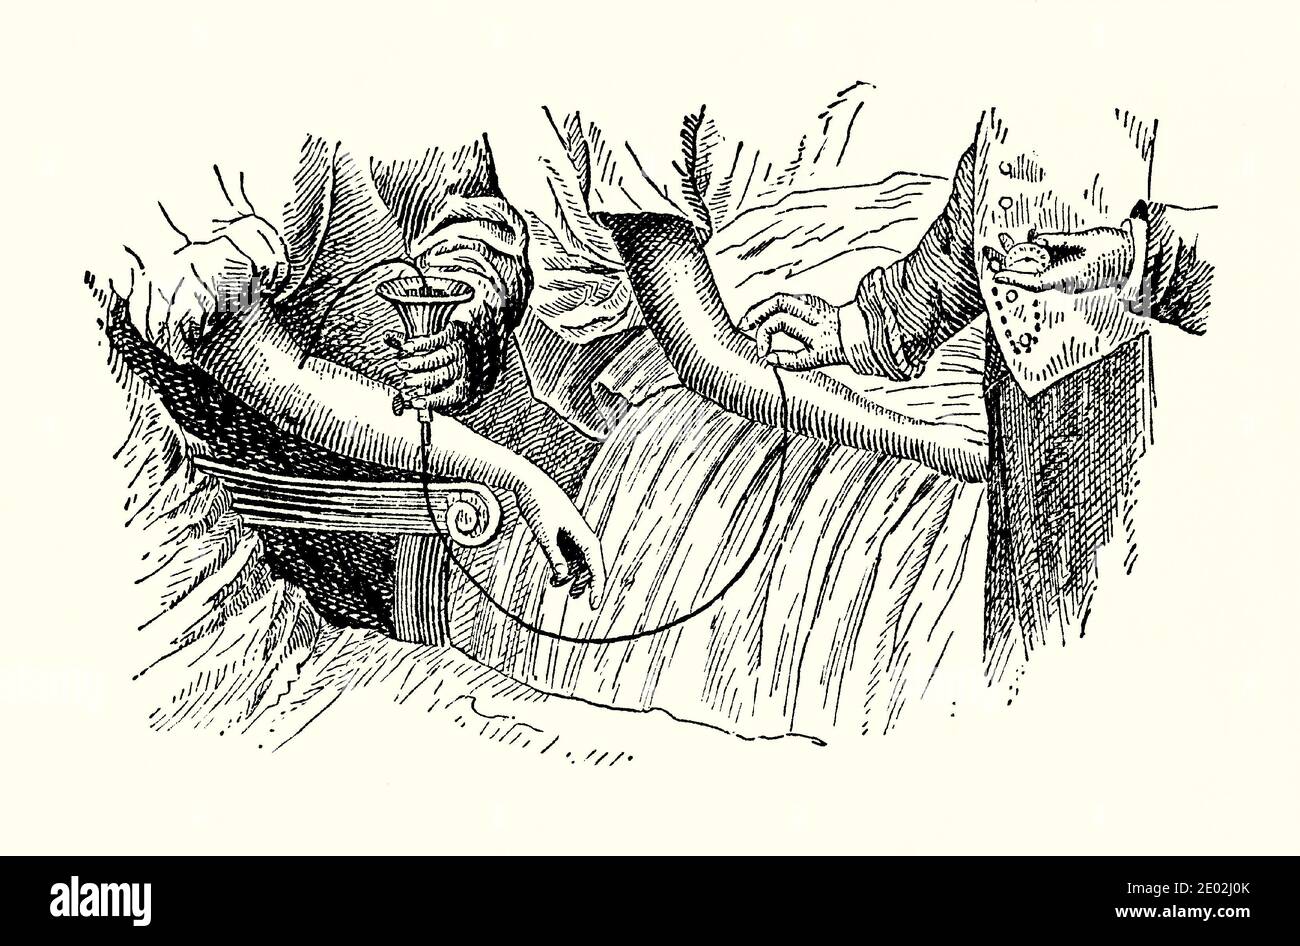 An old engraving of Victorian blood transfusion apparatus. It is from a mechanical engineering book of the 1880s. This French device collects the donor’s blood in a cup (left). The blood is forced via a canula into the patient’s vein (right). Blood transfusion is the process of transferring blood or blood products into one's circulation intravenously. Transfusions are used for various medical conditions to replace lost components of the blood. Early transfusions used whole blood, but today medical practice commonly uses only the components of the blood. Stock Photo